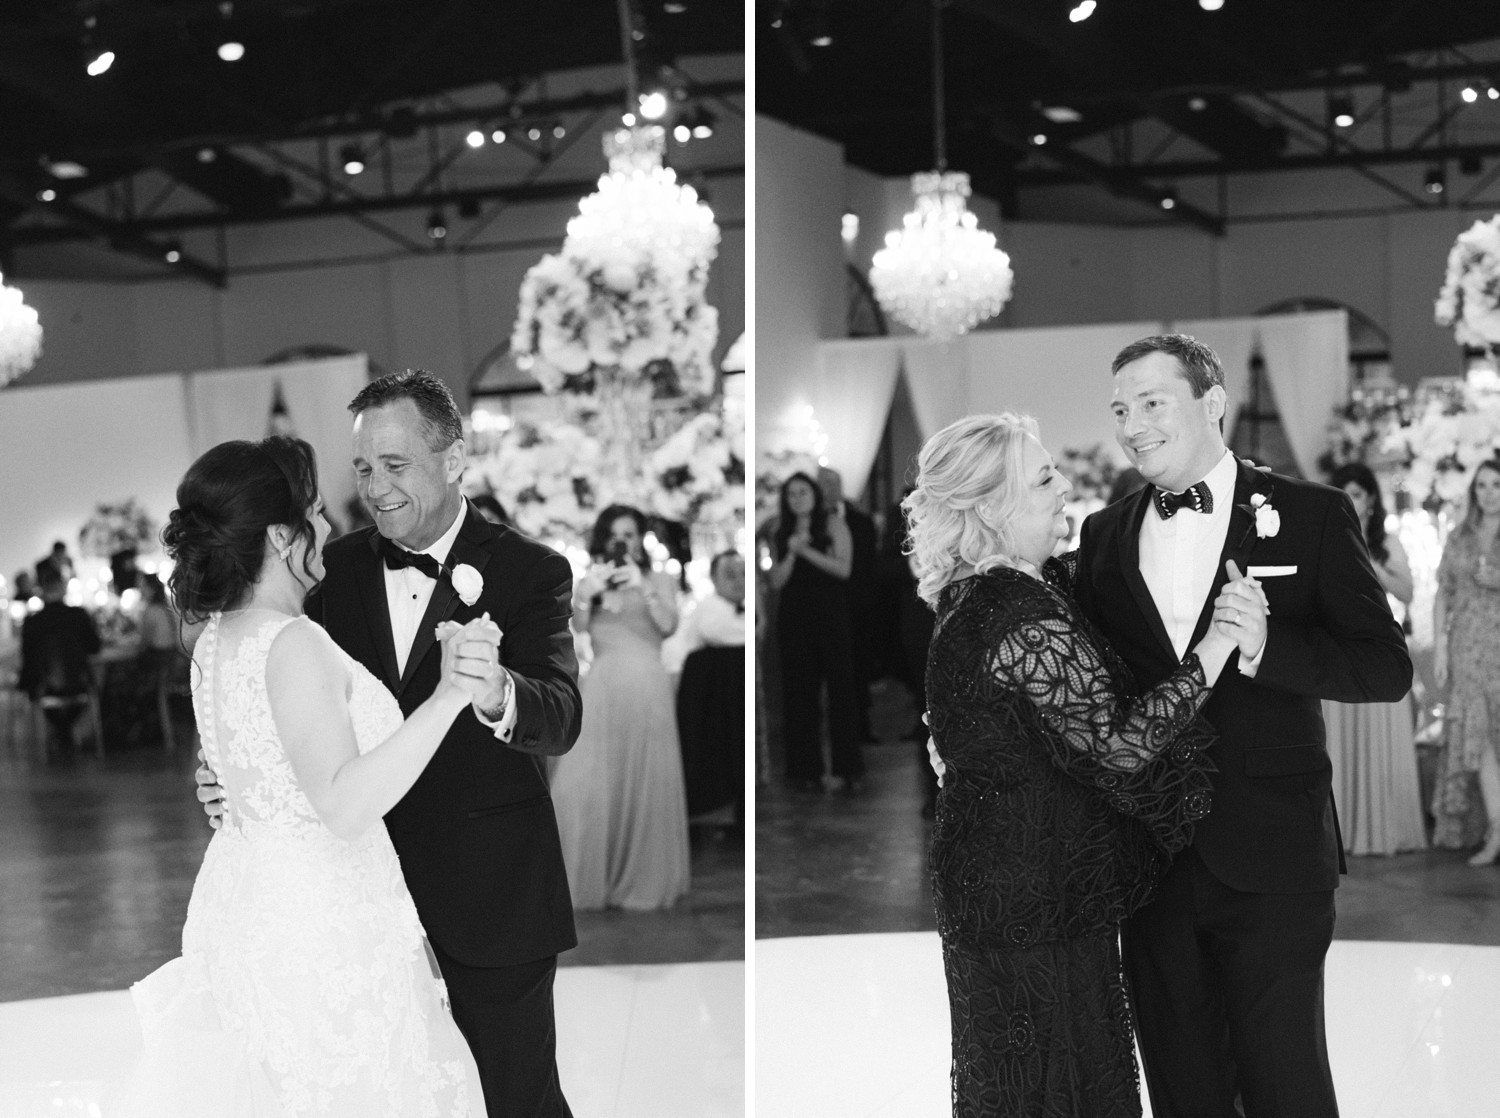 First Dances at The Revaire